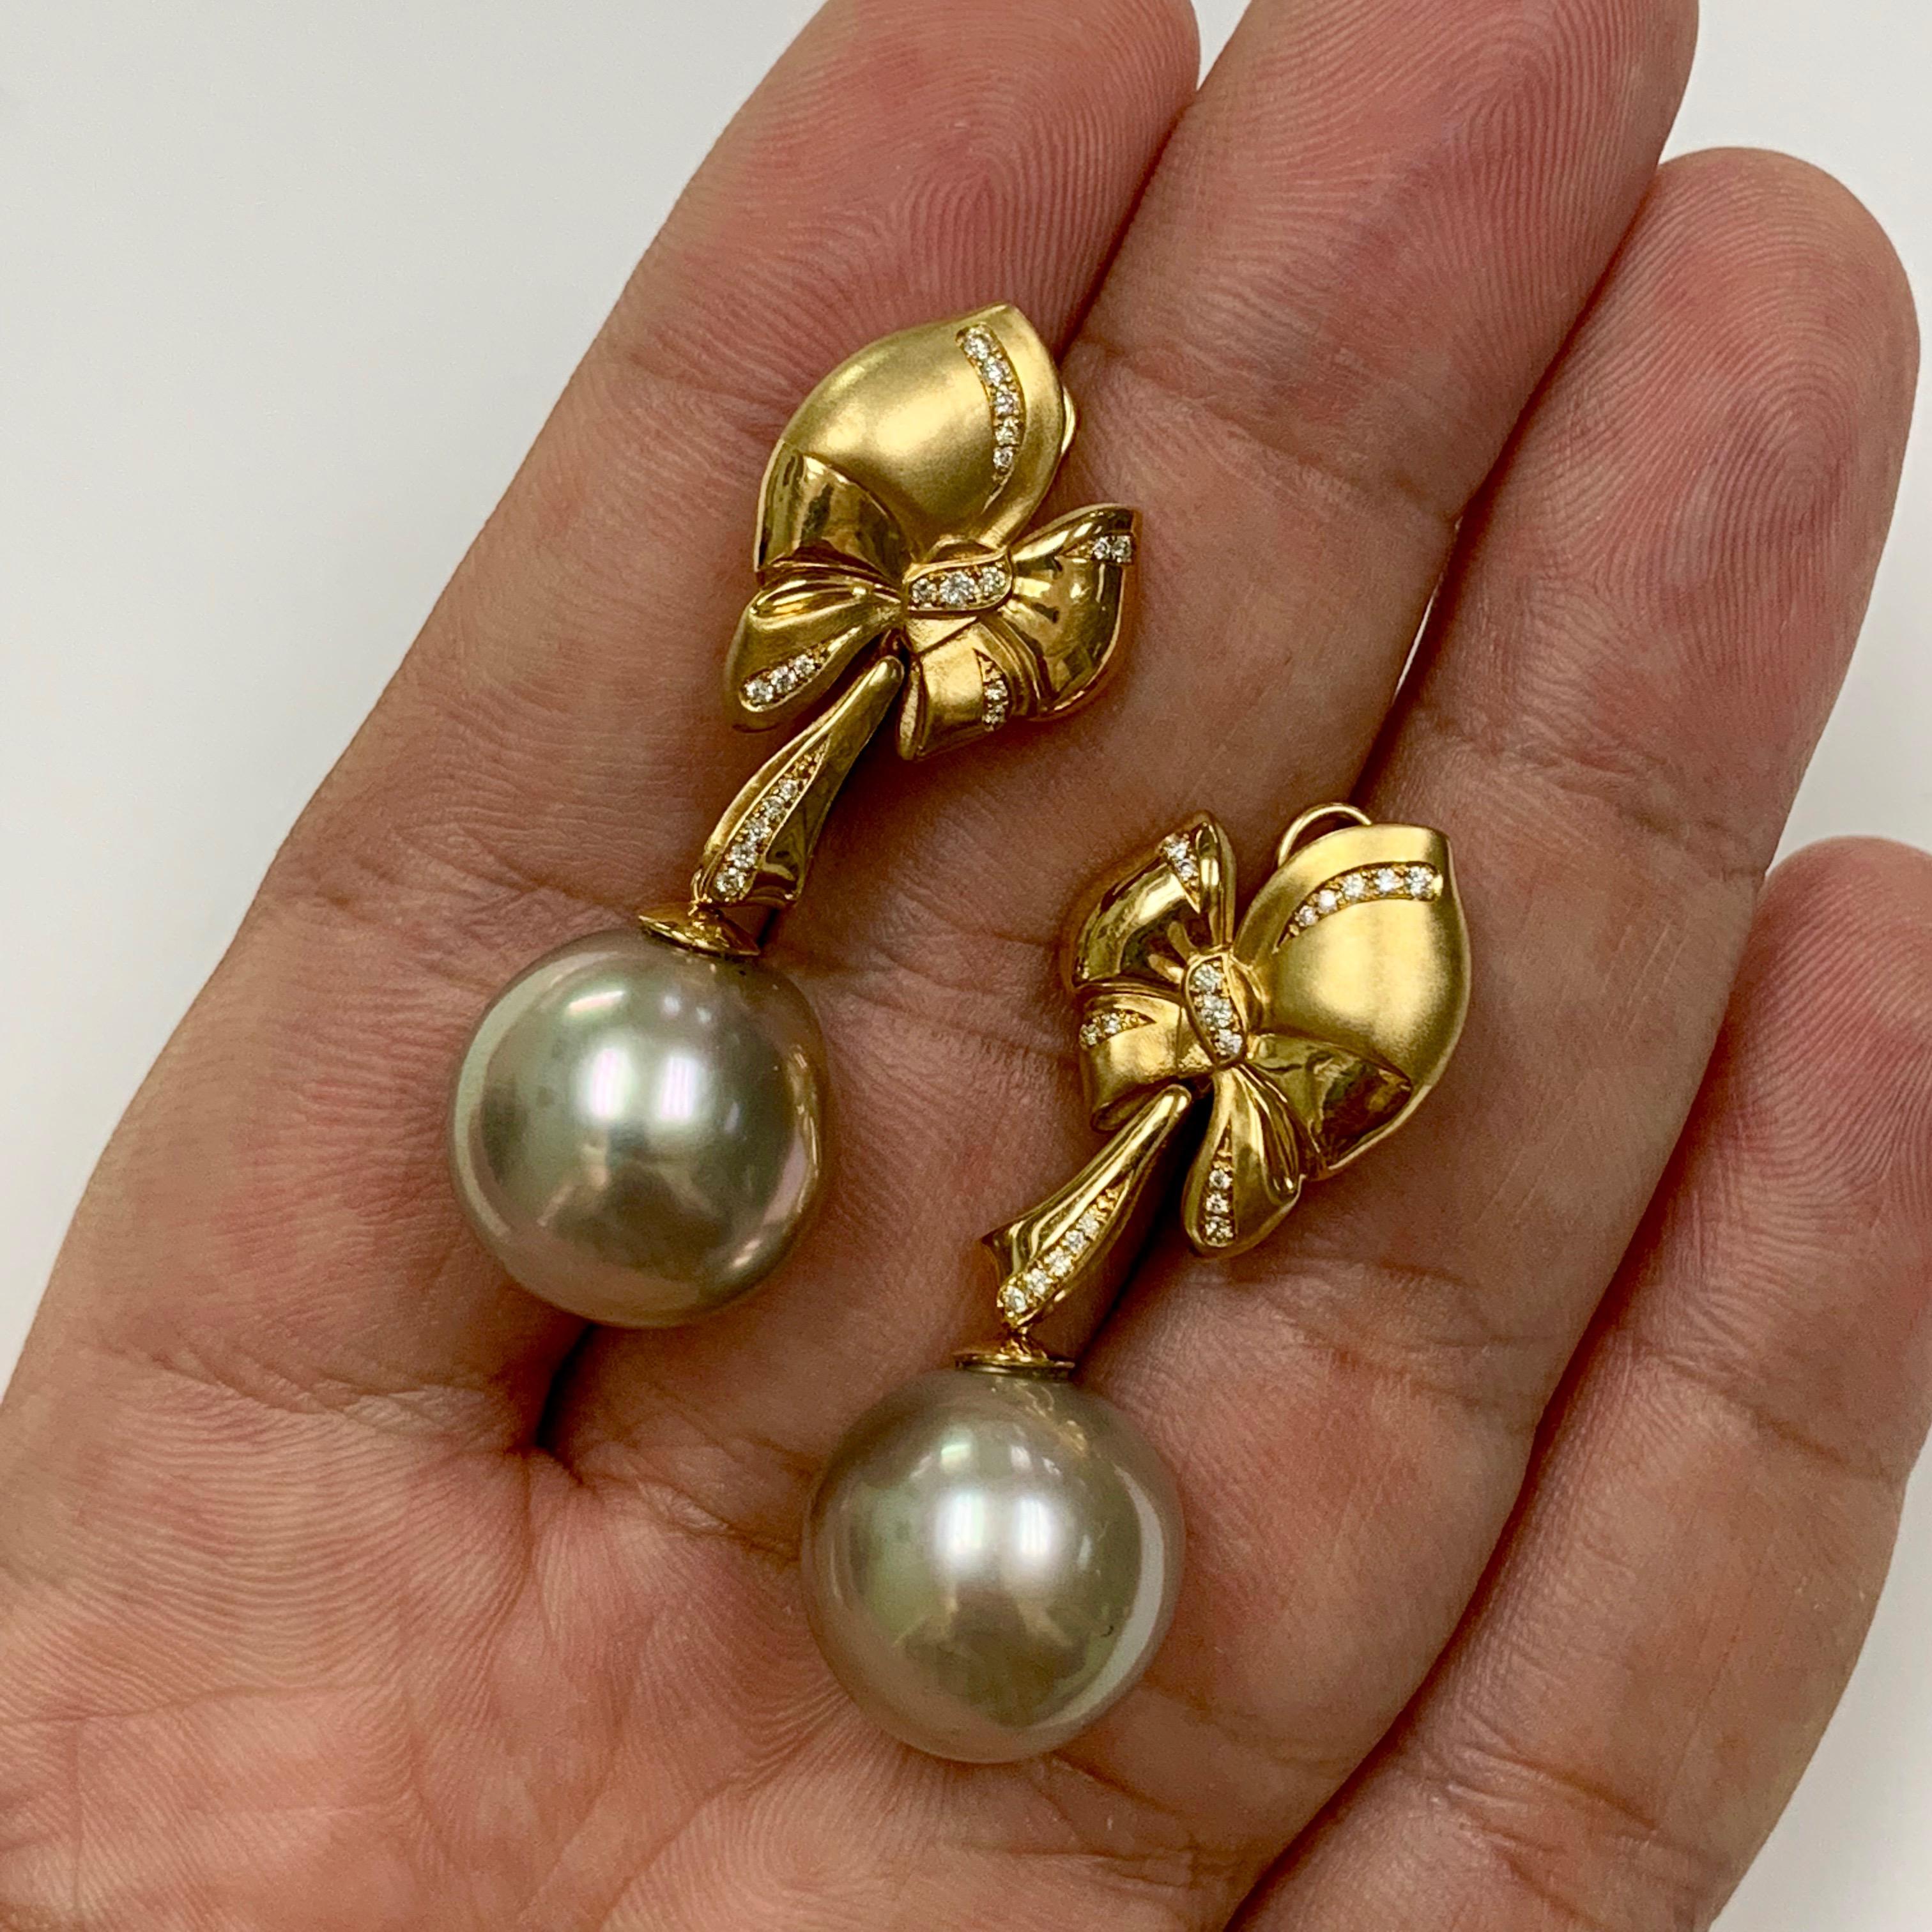 Diamond Mocca Color Tahiti Pearl 18 Karat Yellow Gold Bow Earrings

Very rare combination of color and size of the Pearl. Unusual Mocca Color Tahiti Pearl with impressive size of 16mm each. Do not miss the design of this masterpiece. Lush and